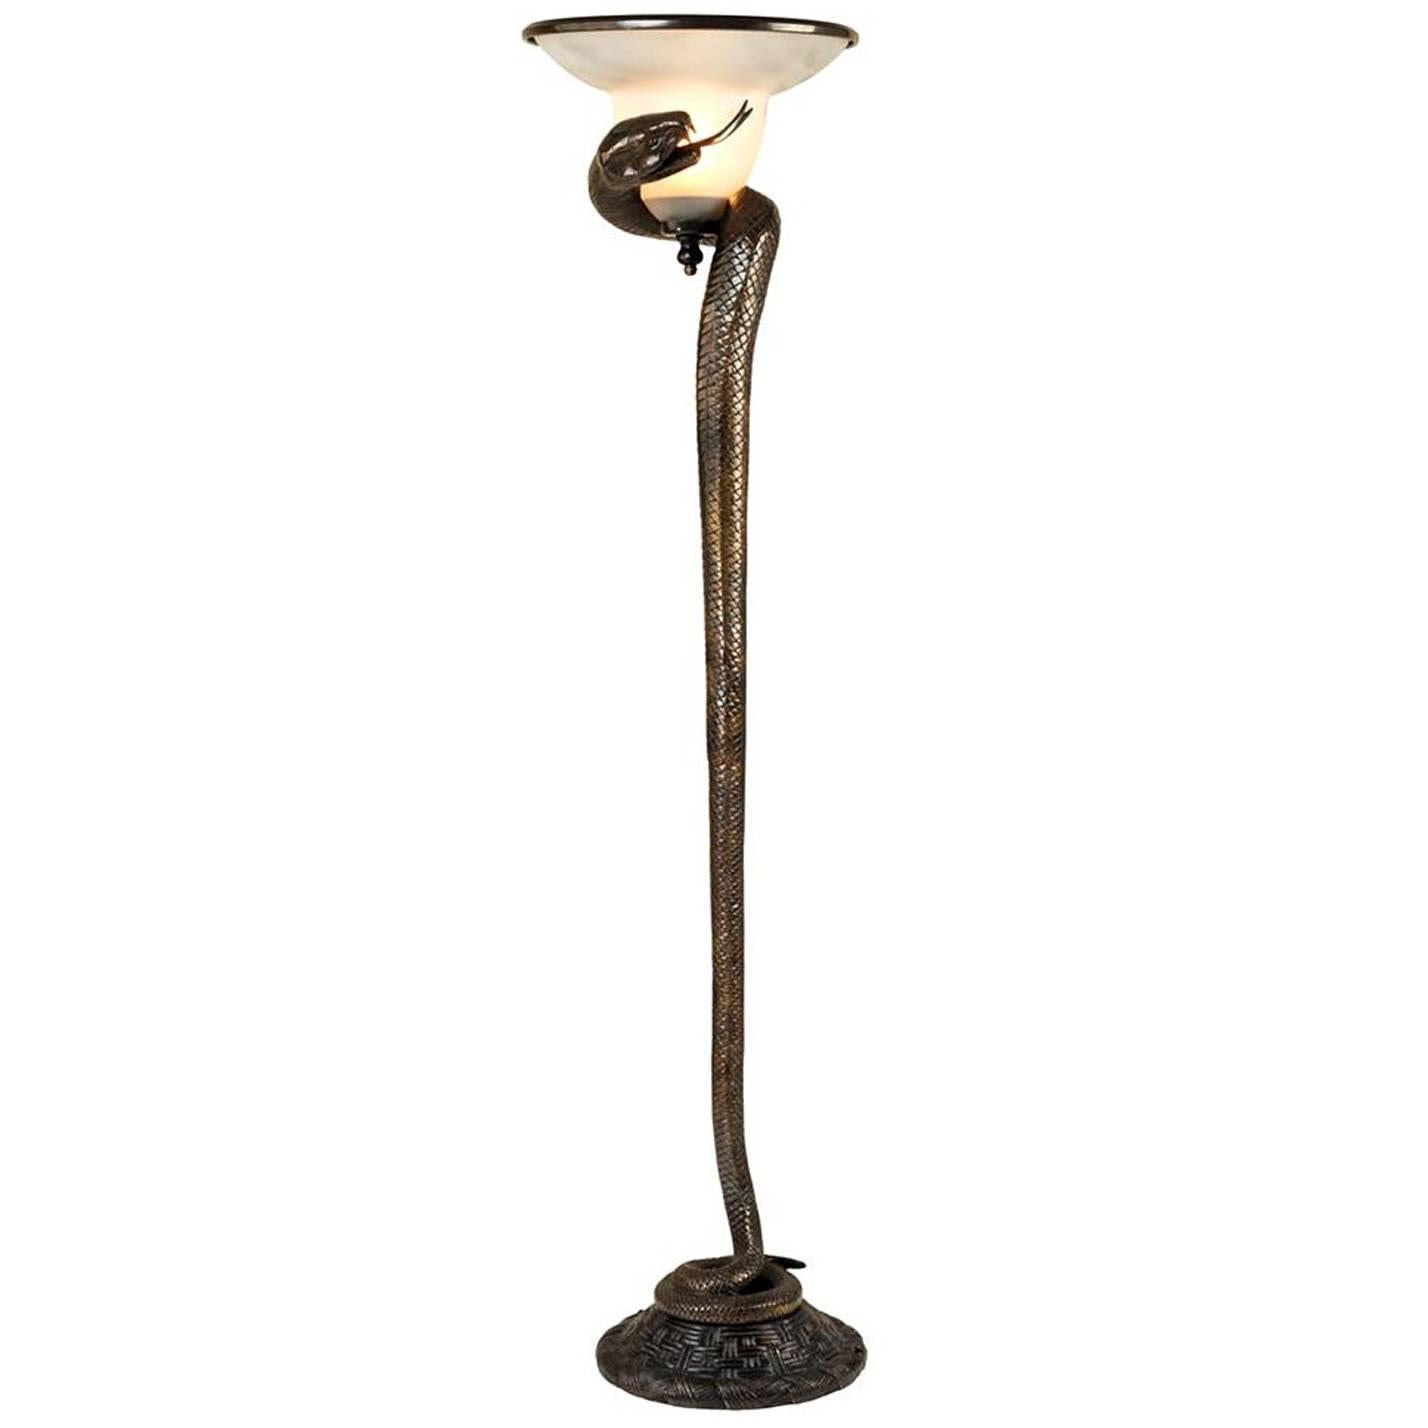 Snake Floor Lamp in Bronze with Frosted Glass Lamp